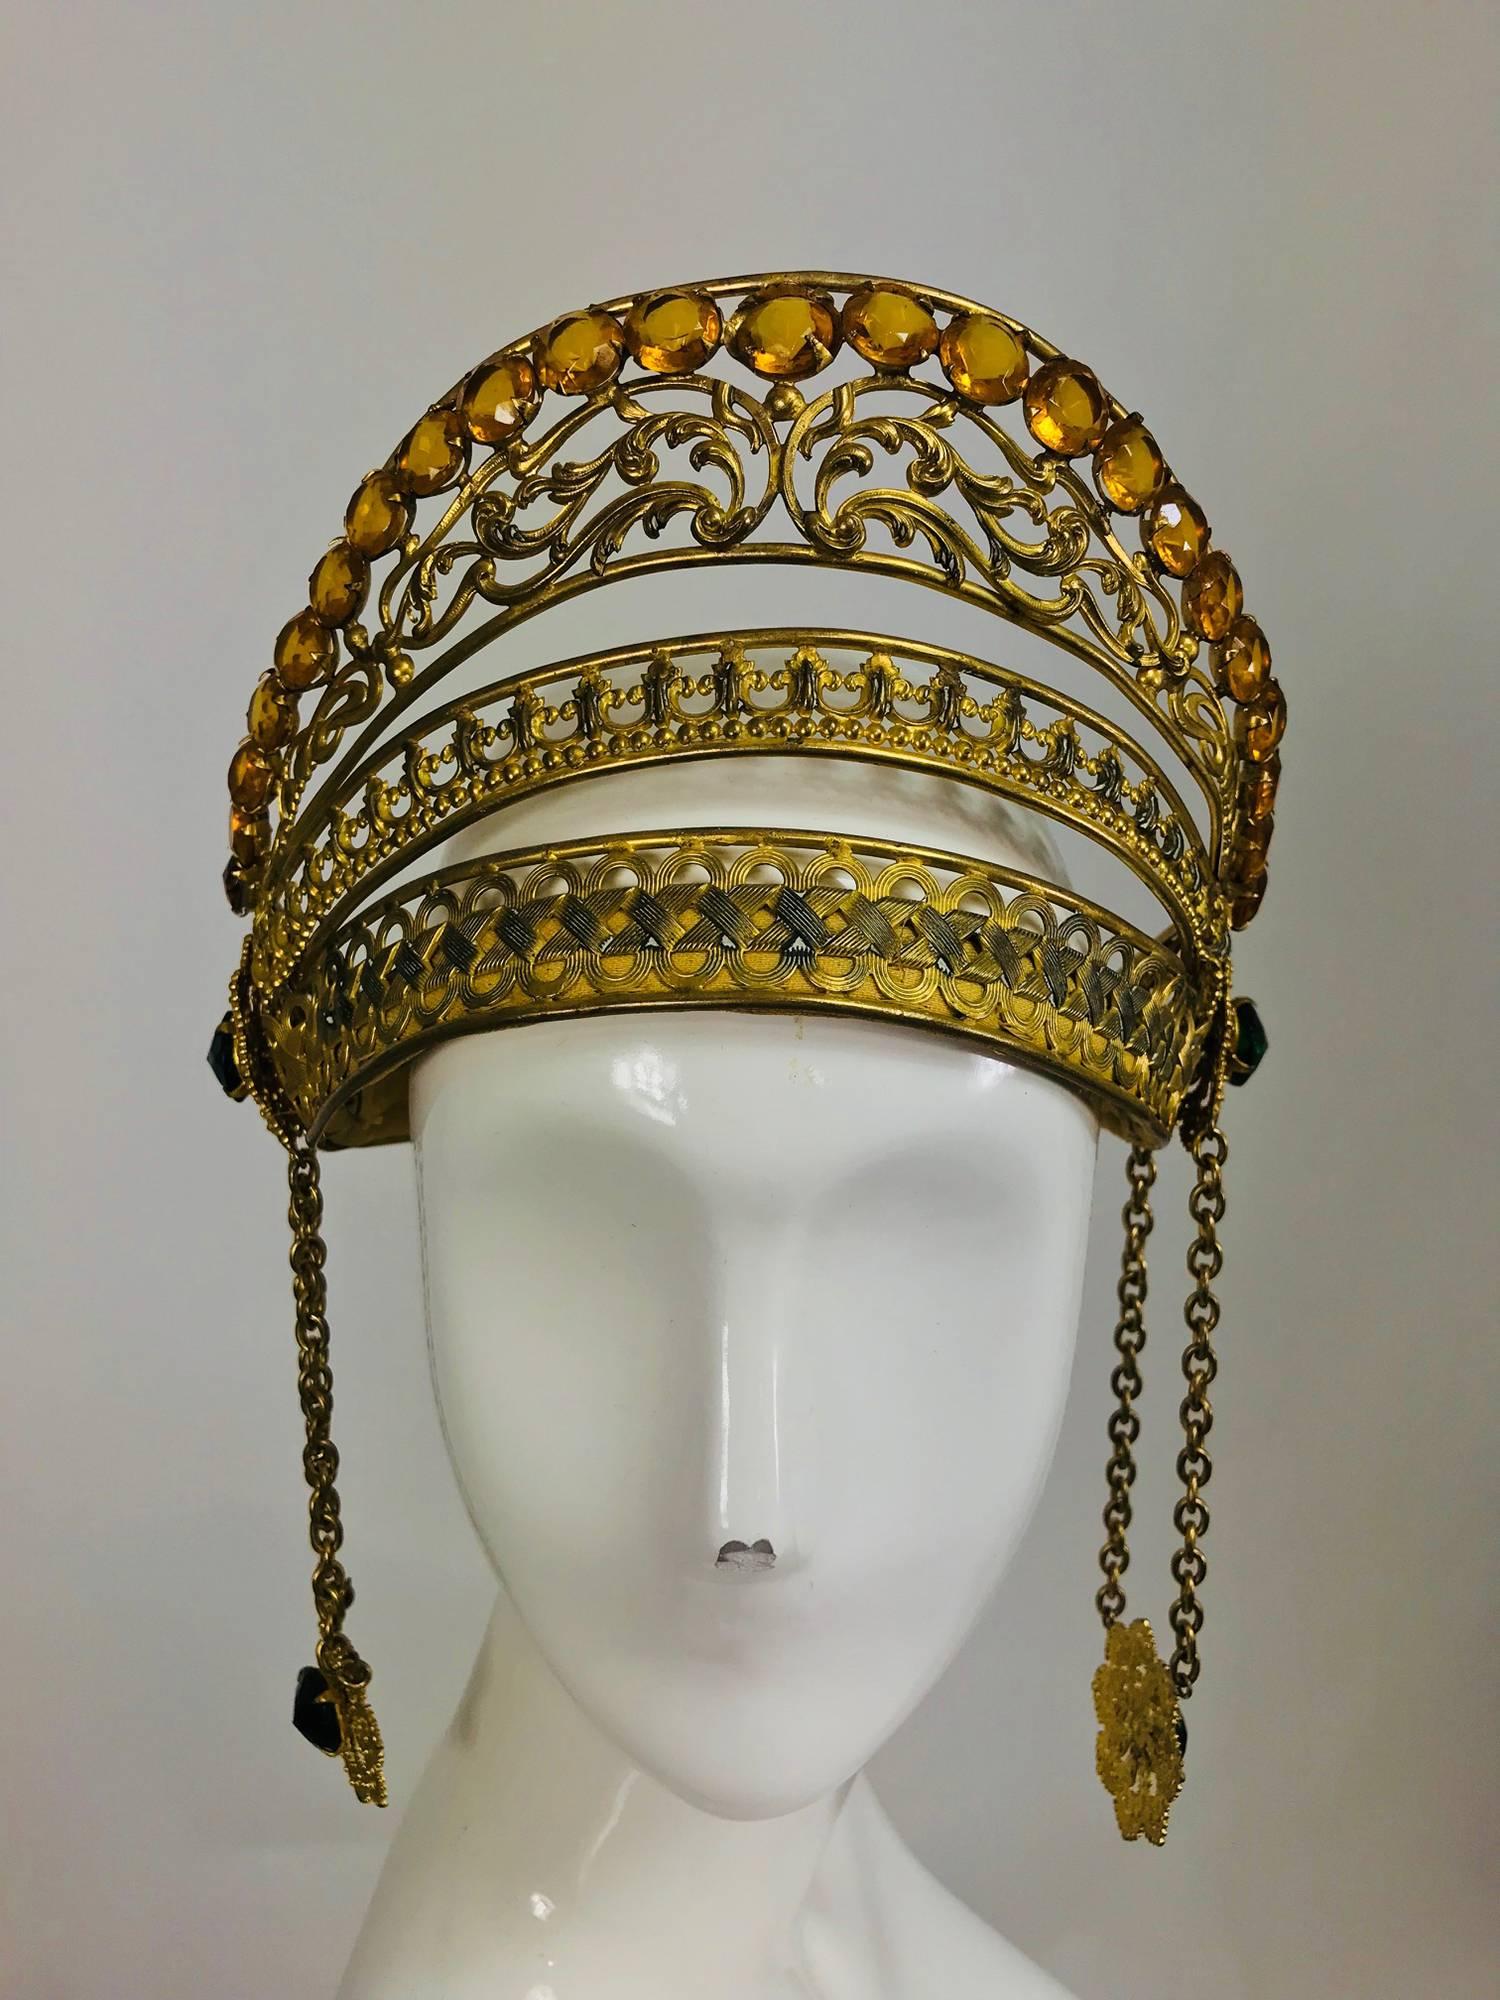 Rare Crown headdress gilt metal with jewels and side drops early 1900s 3